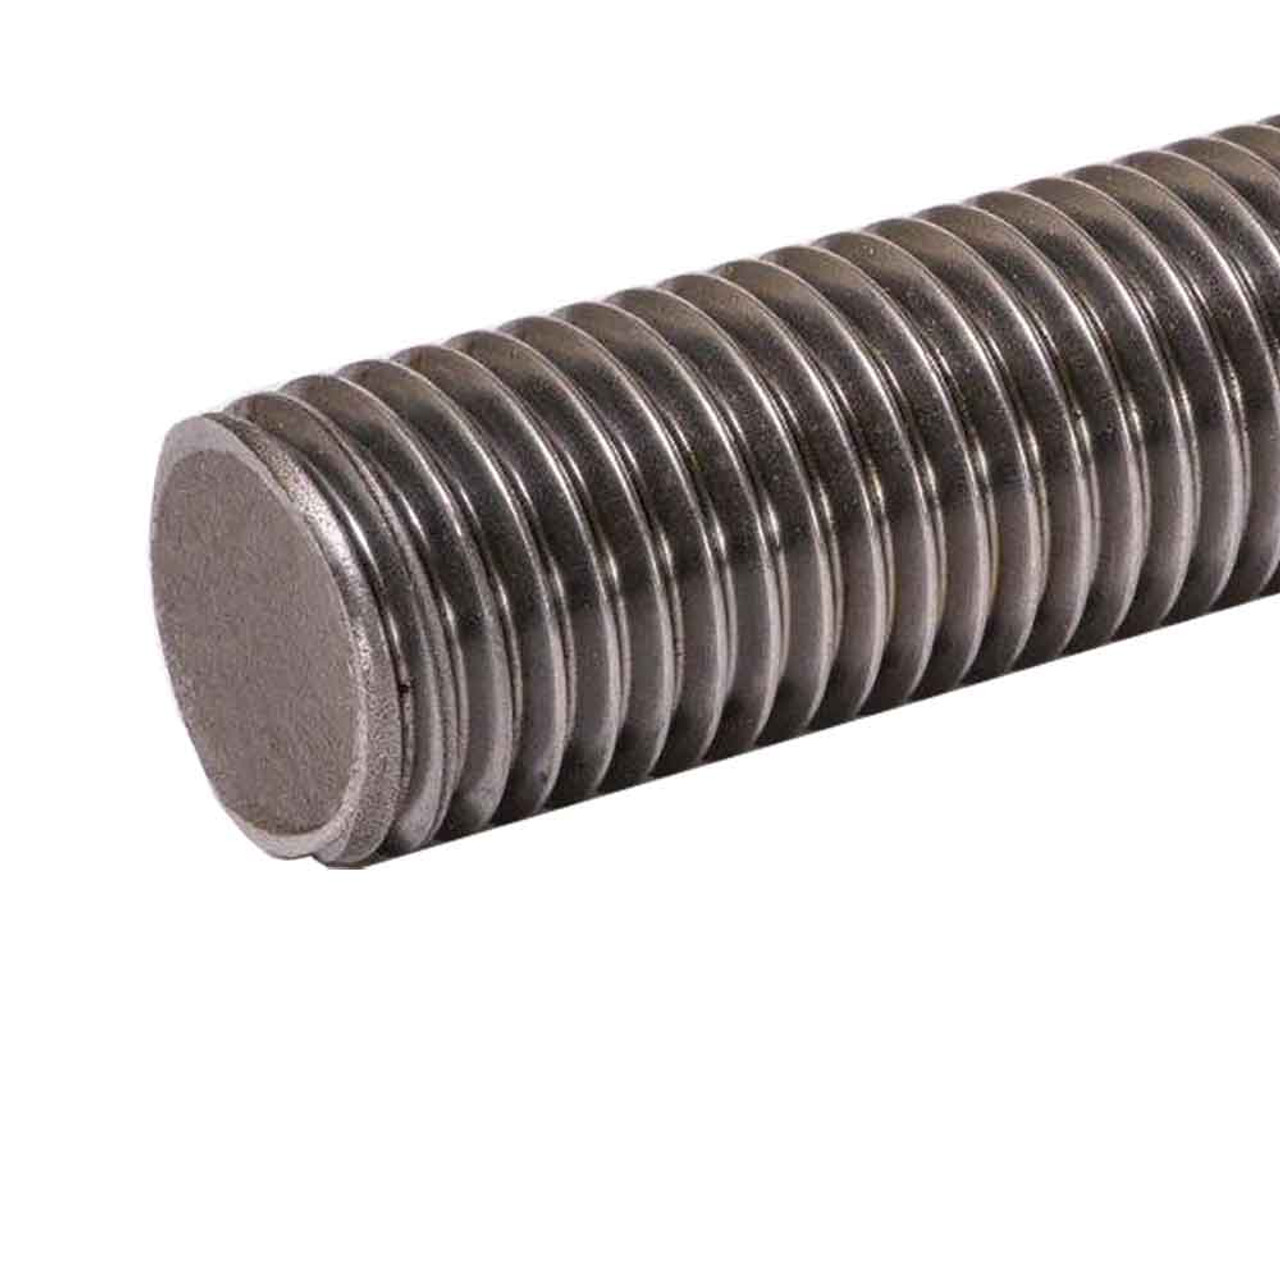 5/8 - 11 TPI x 72 inches, Low Carbon Steel Threaded Rod, Zinc Coated